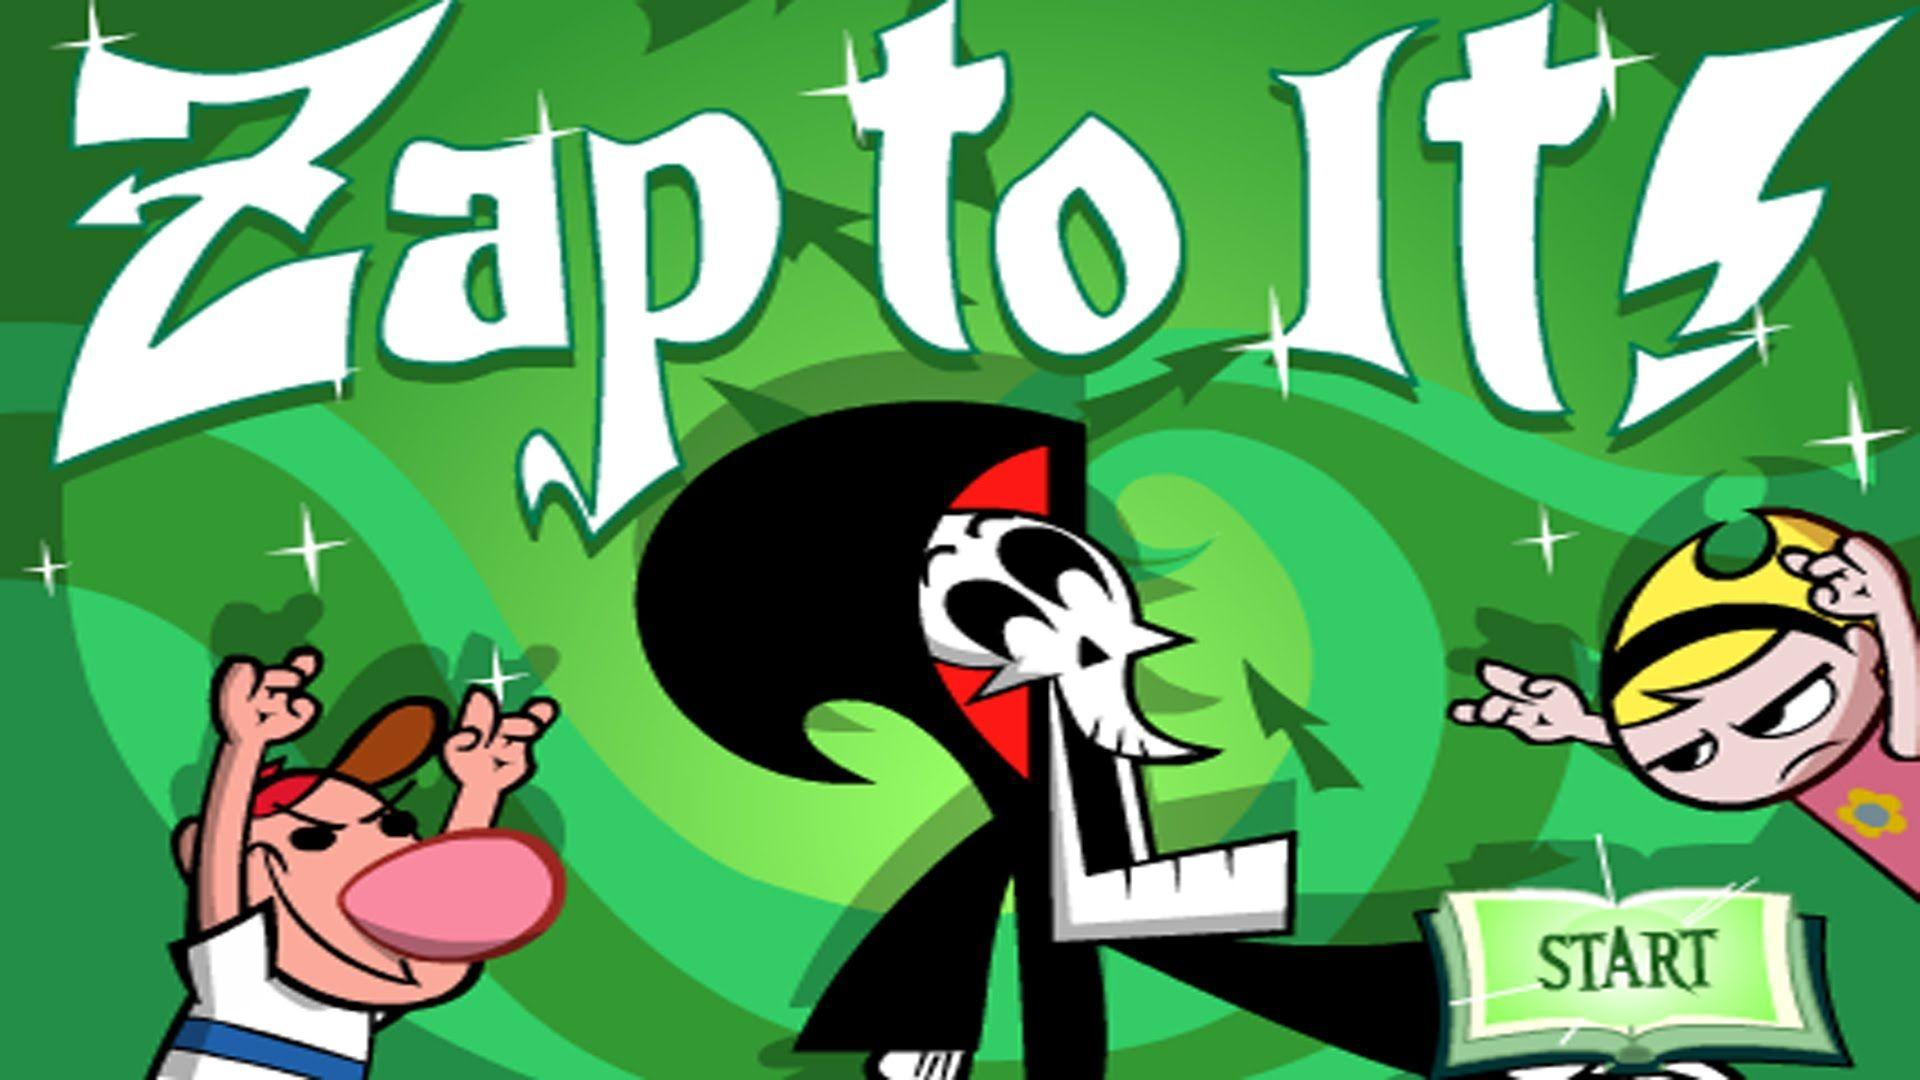 Zap To It!. The Grim Adventures of Billy and Mandy. Cartoon